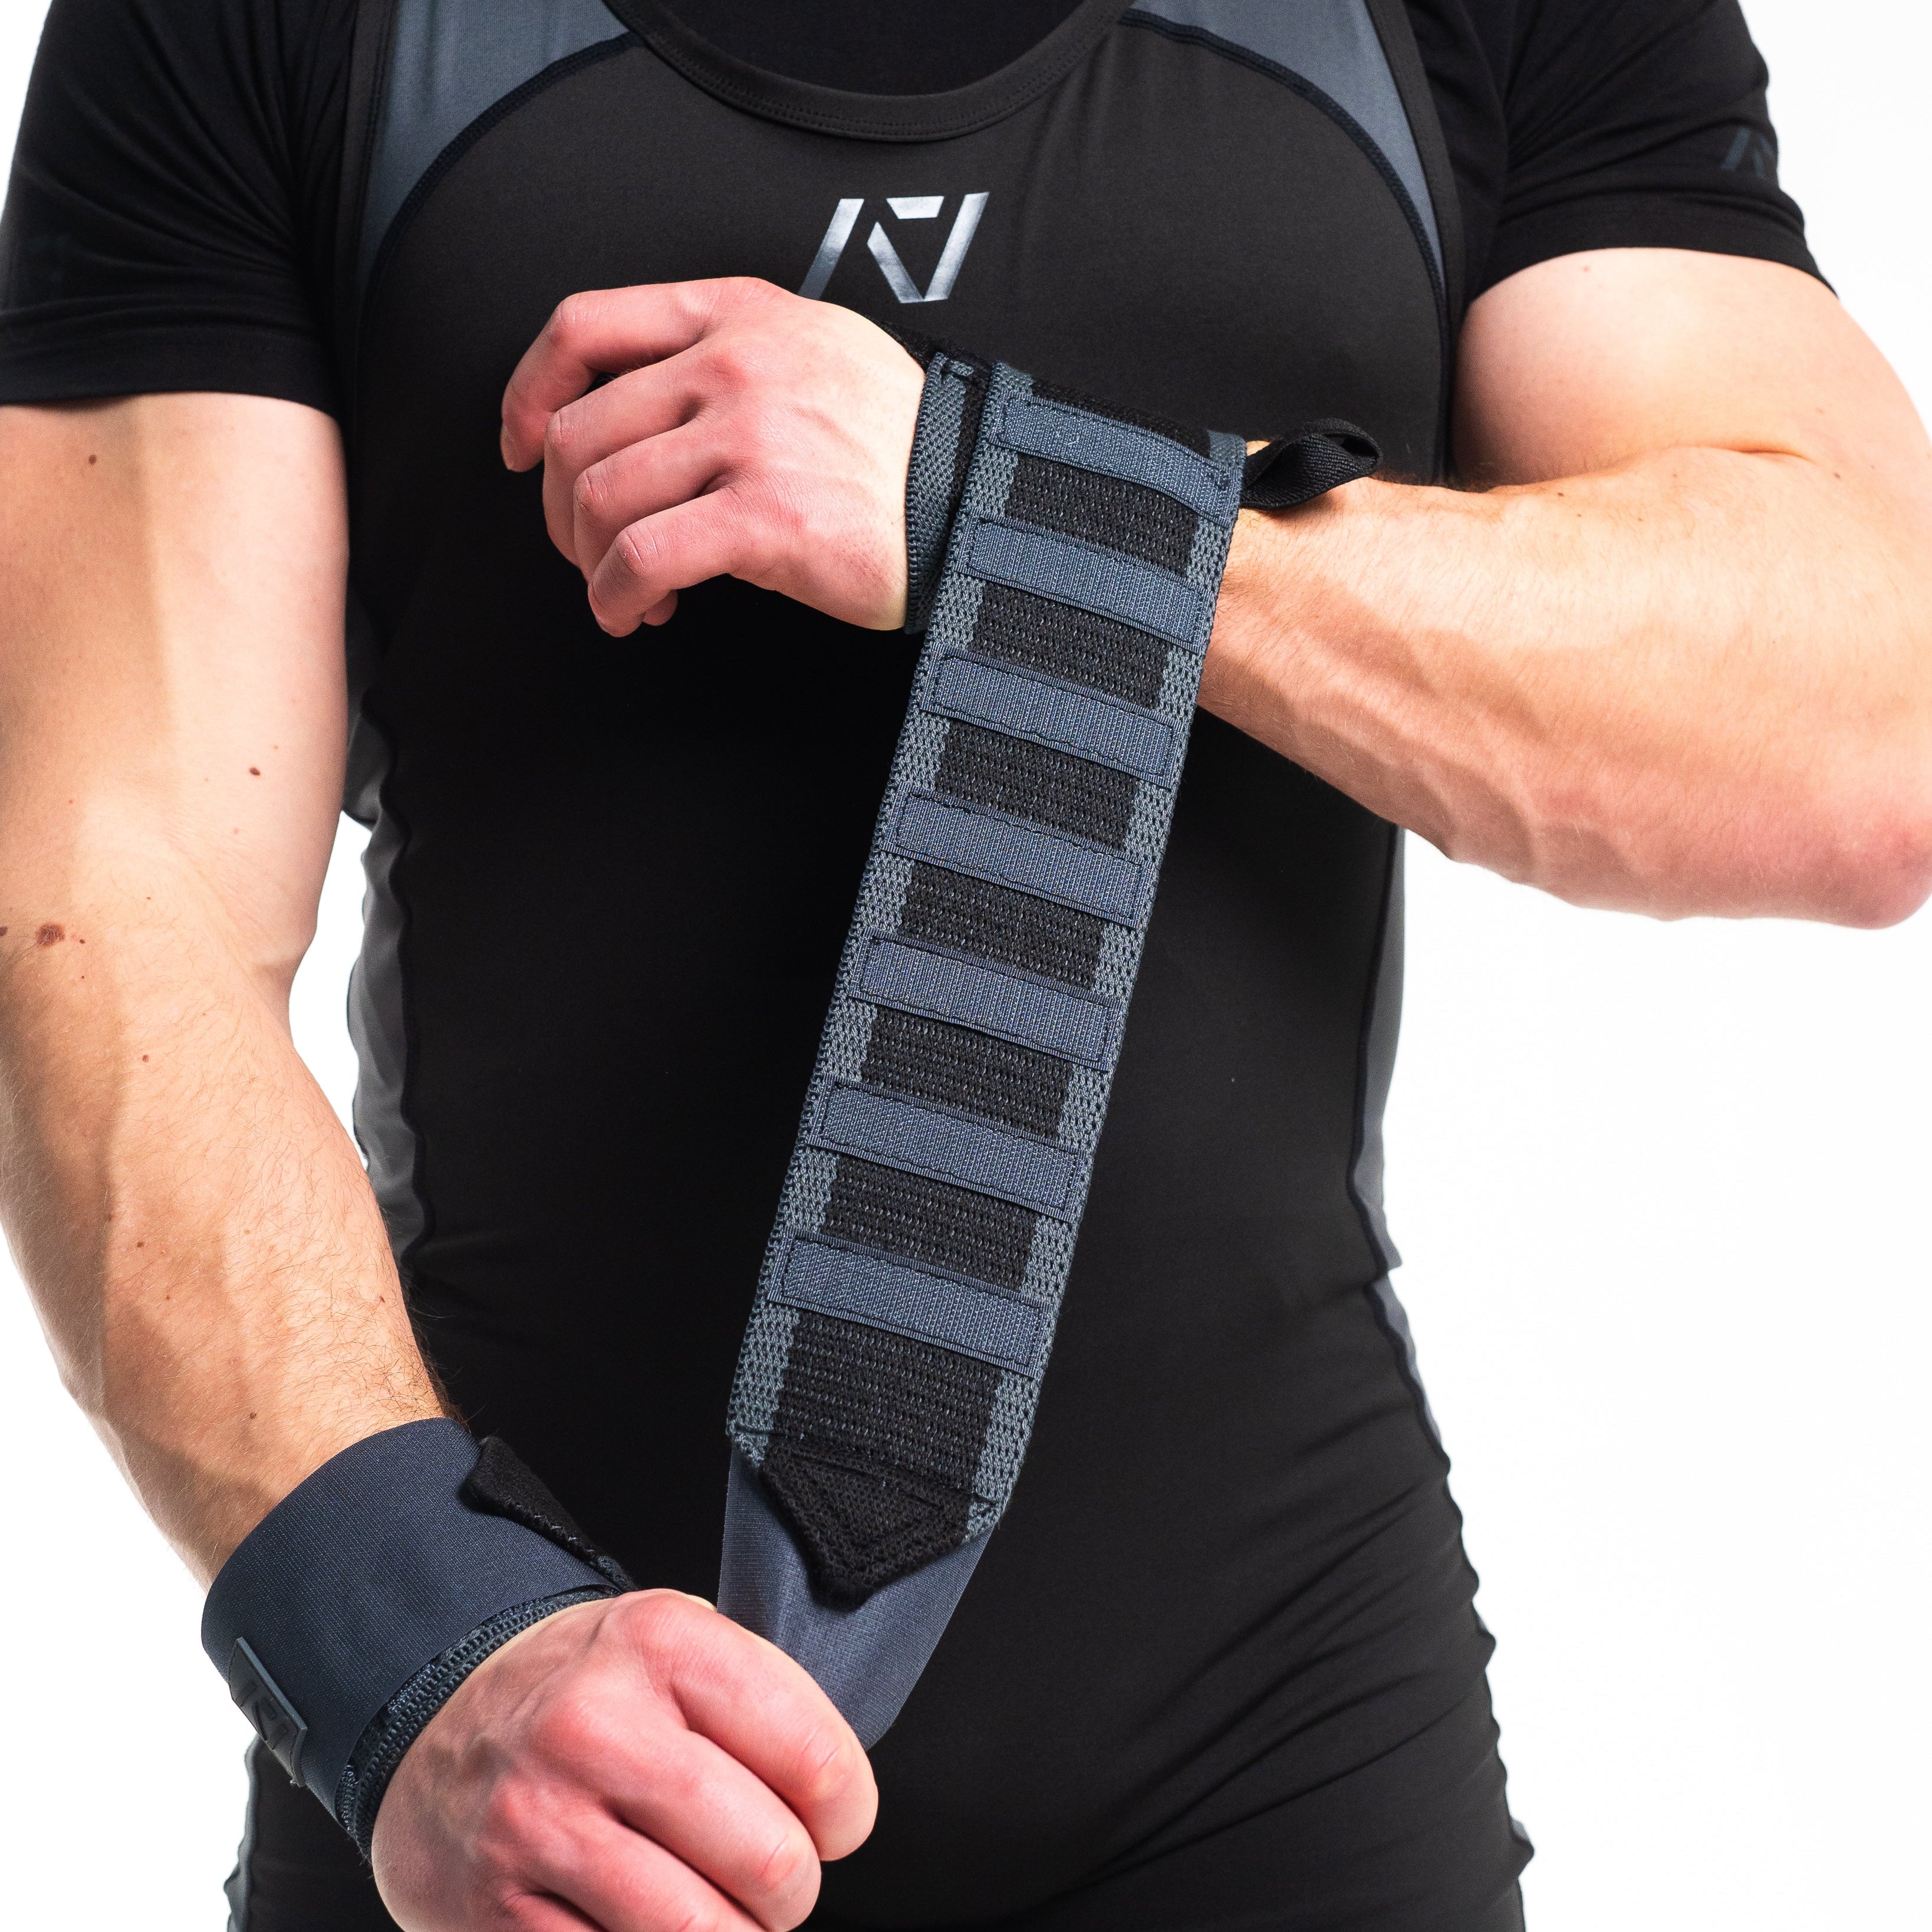 A7 IPF Approved Zebra Wraps feature strips of velcro on the wraps, allowing Zebra Wraps to conform fully to your unique preference of tightness. We offer Zebra wrist wraps in 3 lengths and 4 stiffnesses (Flexi, Mids, Stiff, and Rigor Mortis). The IPF Approved Kit includes Powerlifting Singlet, A7 Meet Shirt, A7 Deadlift Socks, Hourglass Knee Sleeves (Stiff Knee Sleeves and Rigor Mortis Knee Sleeves). Genouillères powerlifting shipping to France, Spain, Ireland, Germany, Italy, Sweden and EU. 